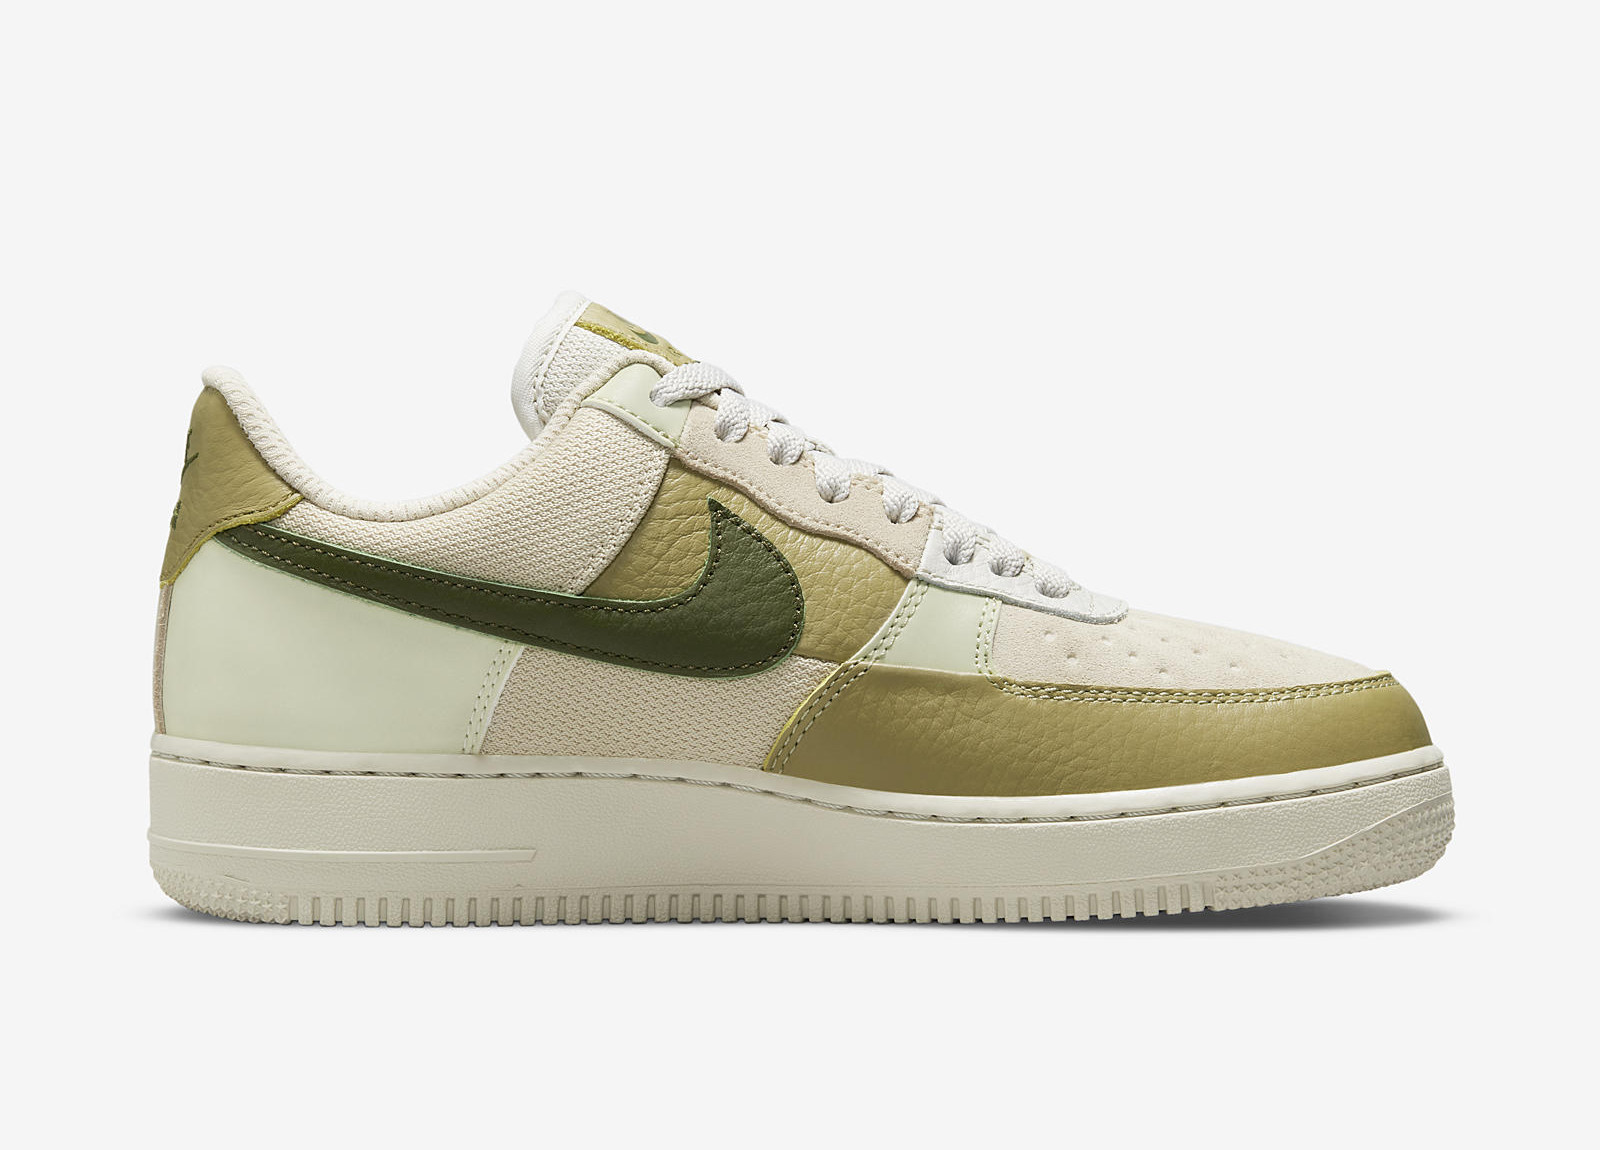 Nike Air Force 1 Low
« Rough Green »